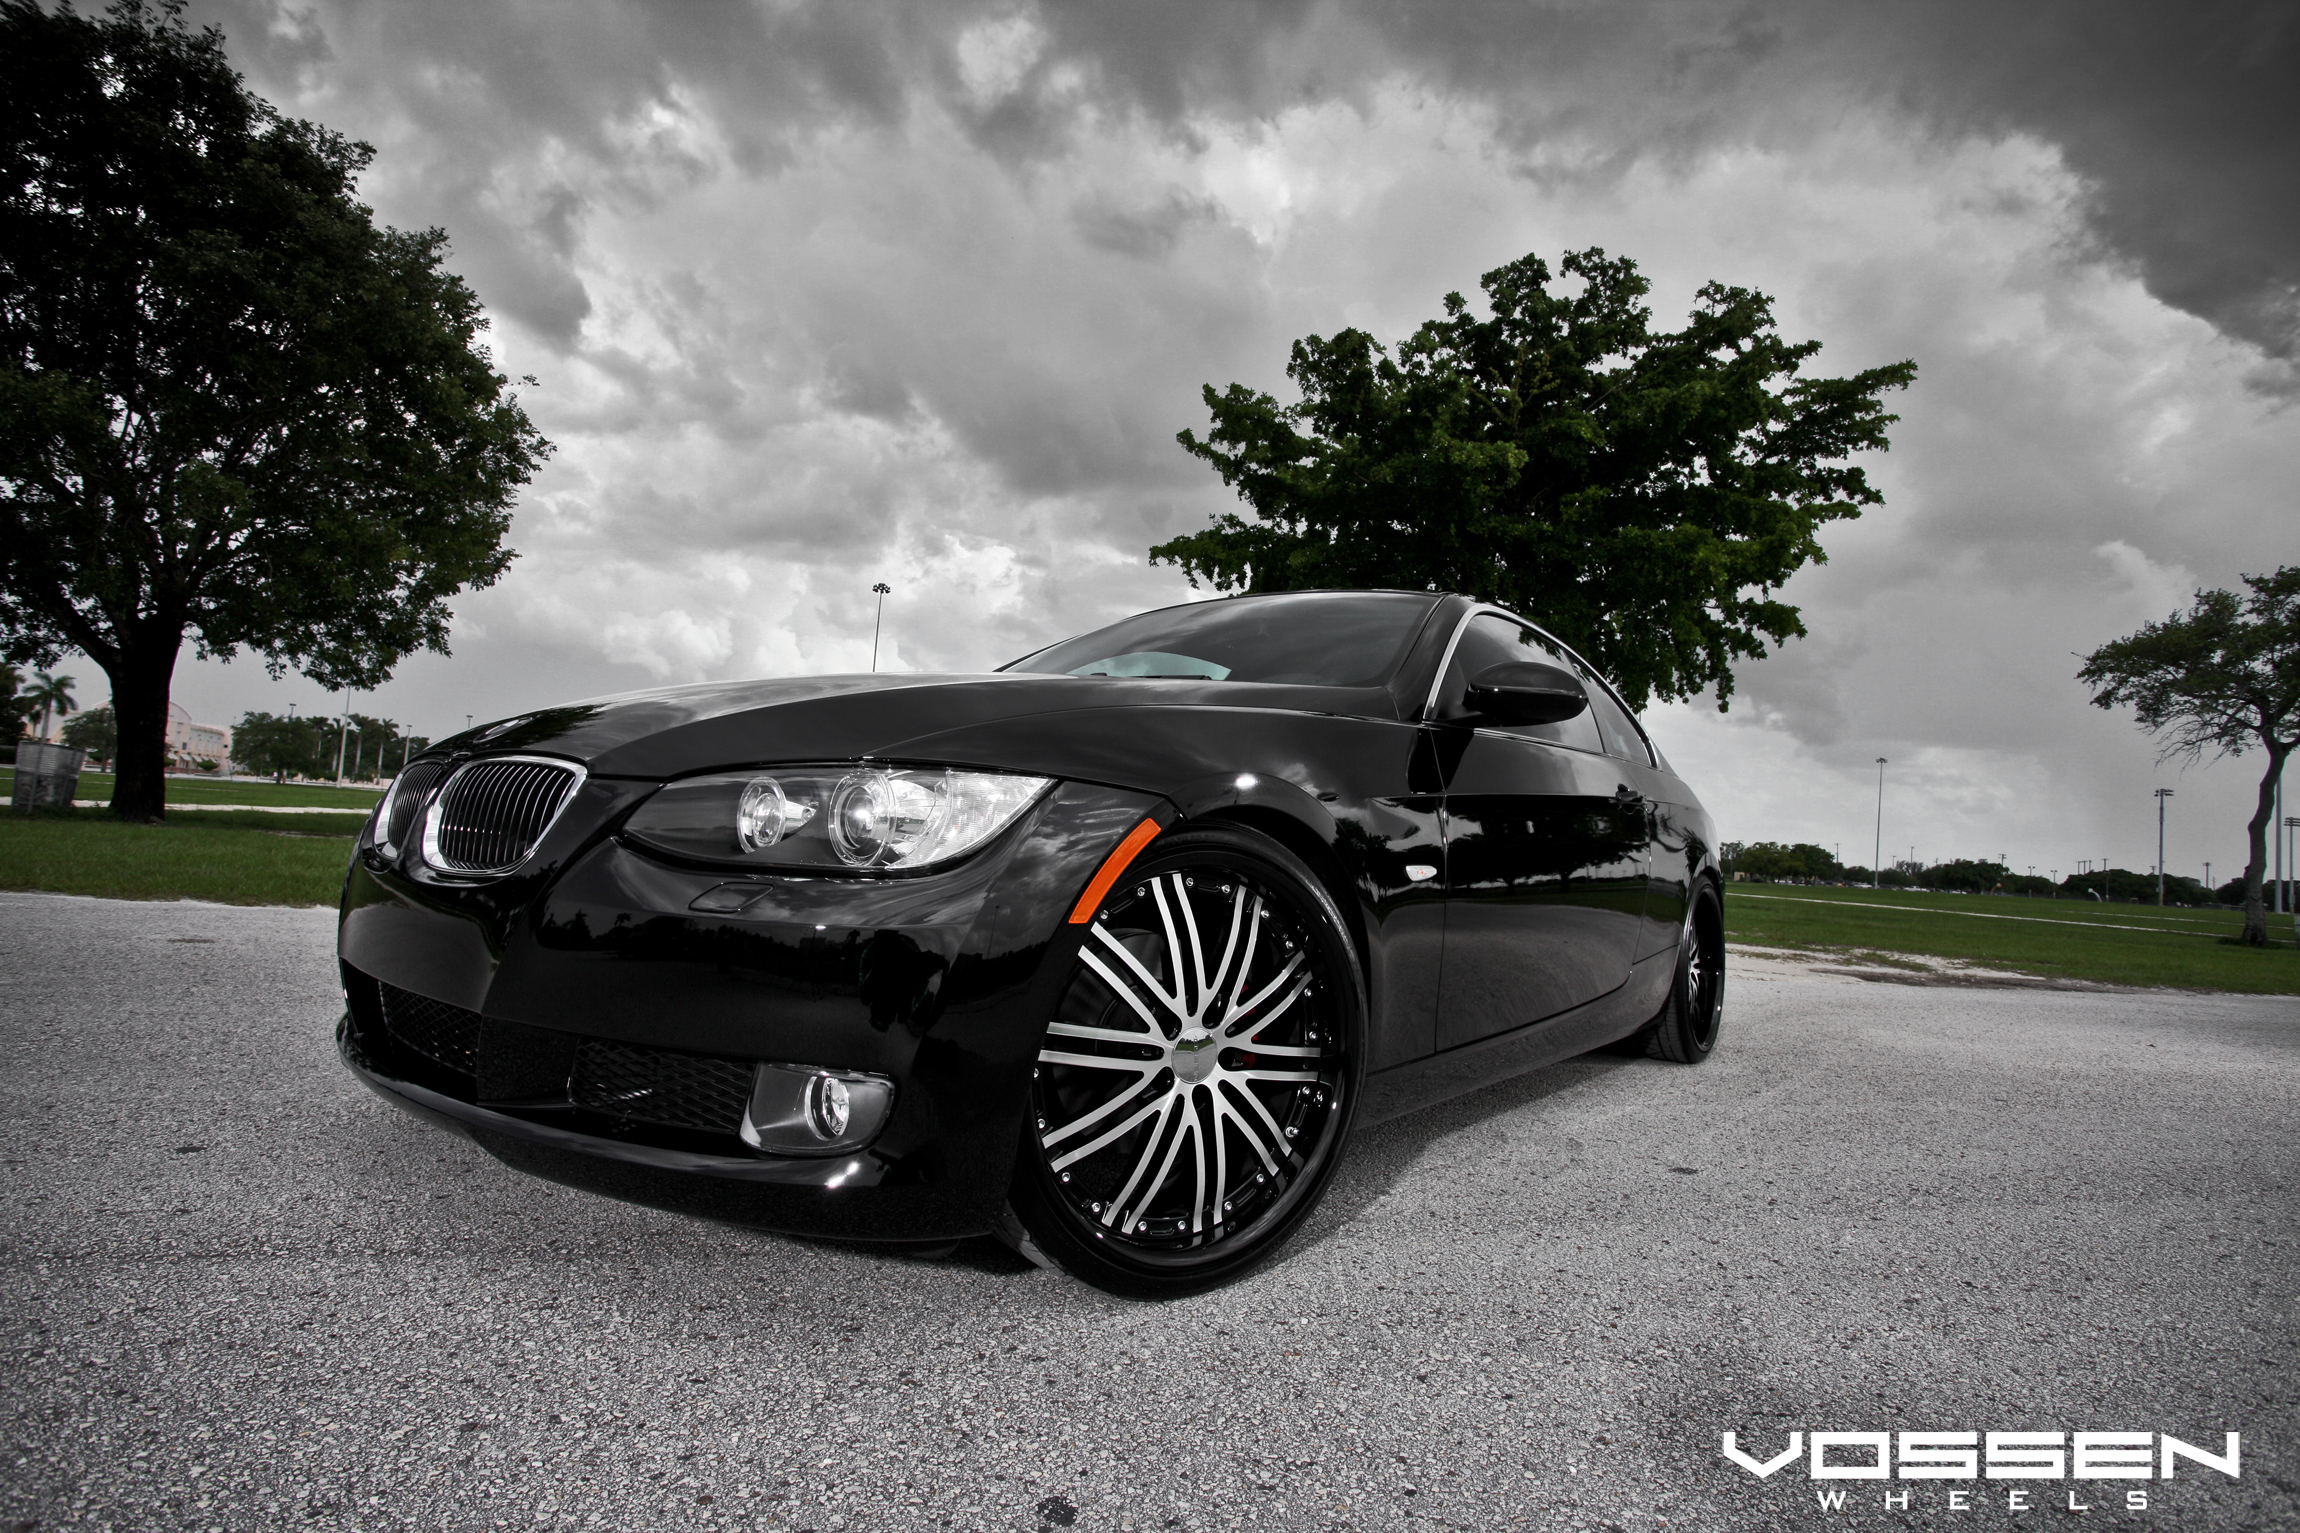 BMW 3-Series Coupe with Vossen VVS-082 Wheels | Flickr - Photo ...